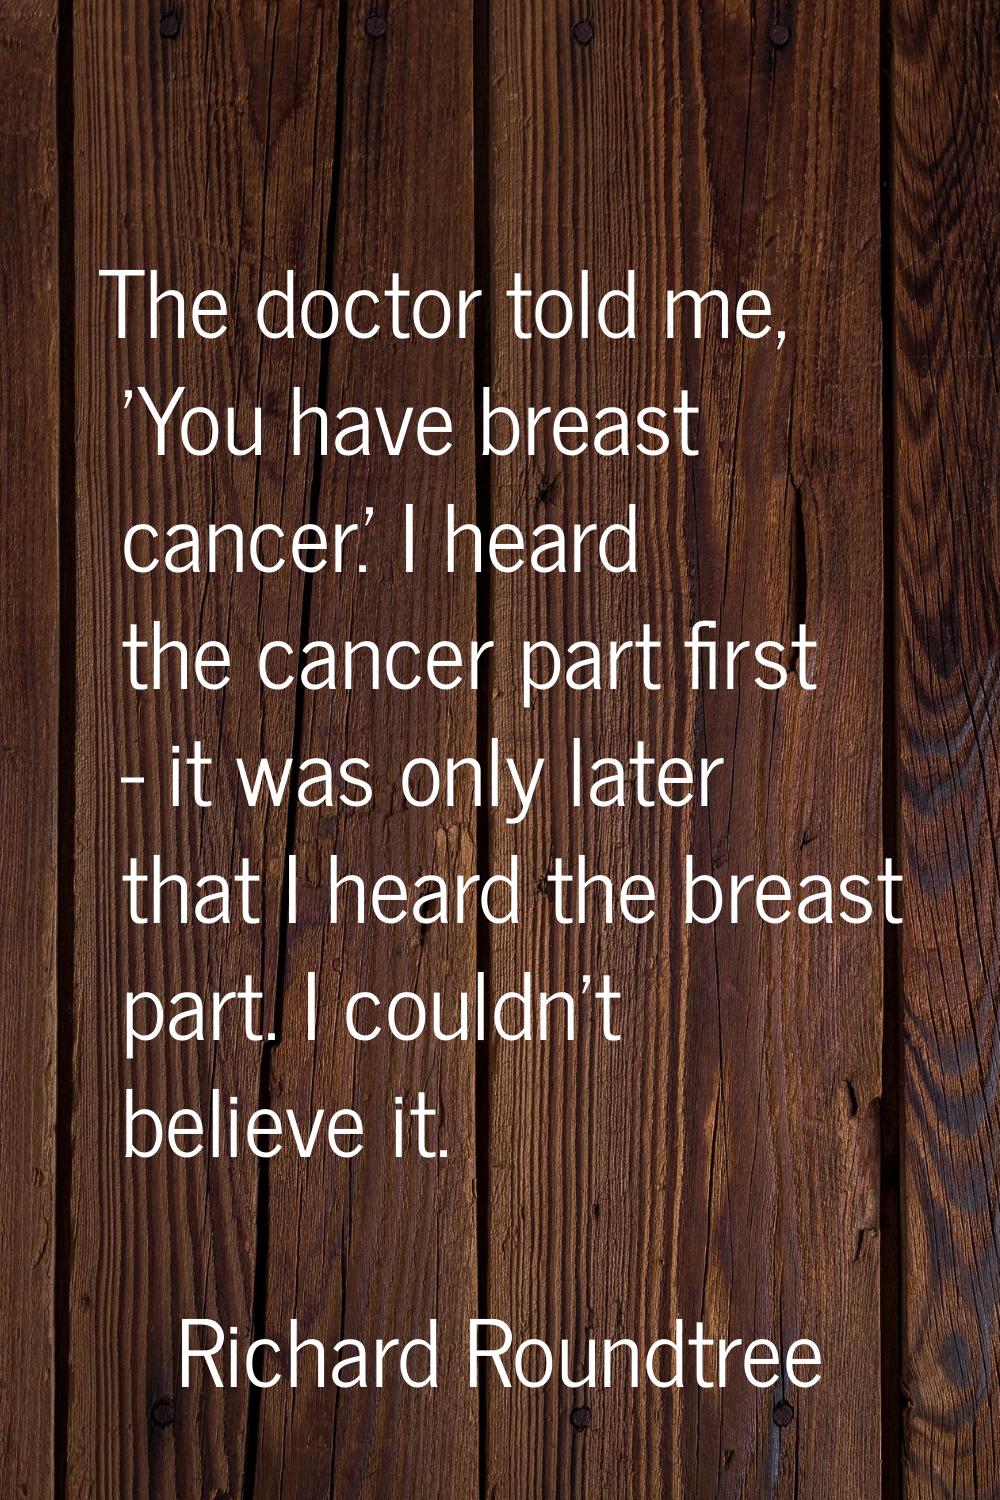 The doctor told me, 'You have breast cancer.' I heard the cancer part first - it was only later tha